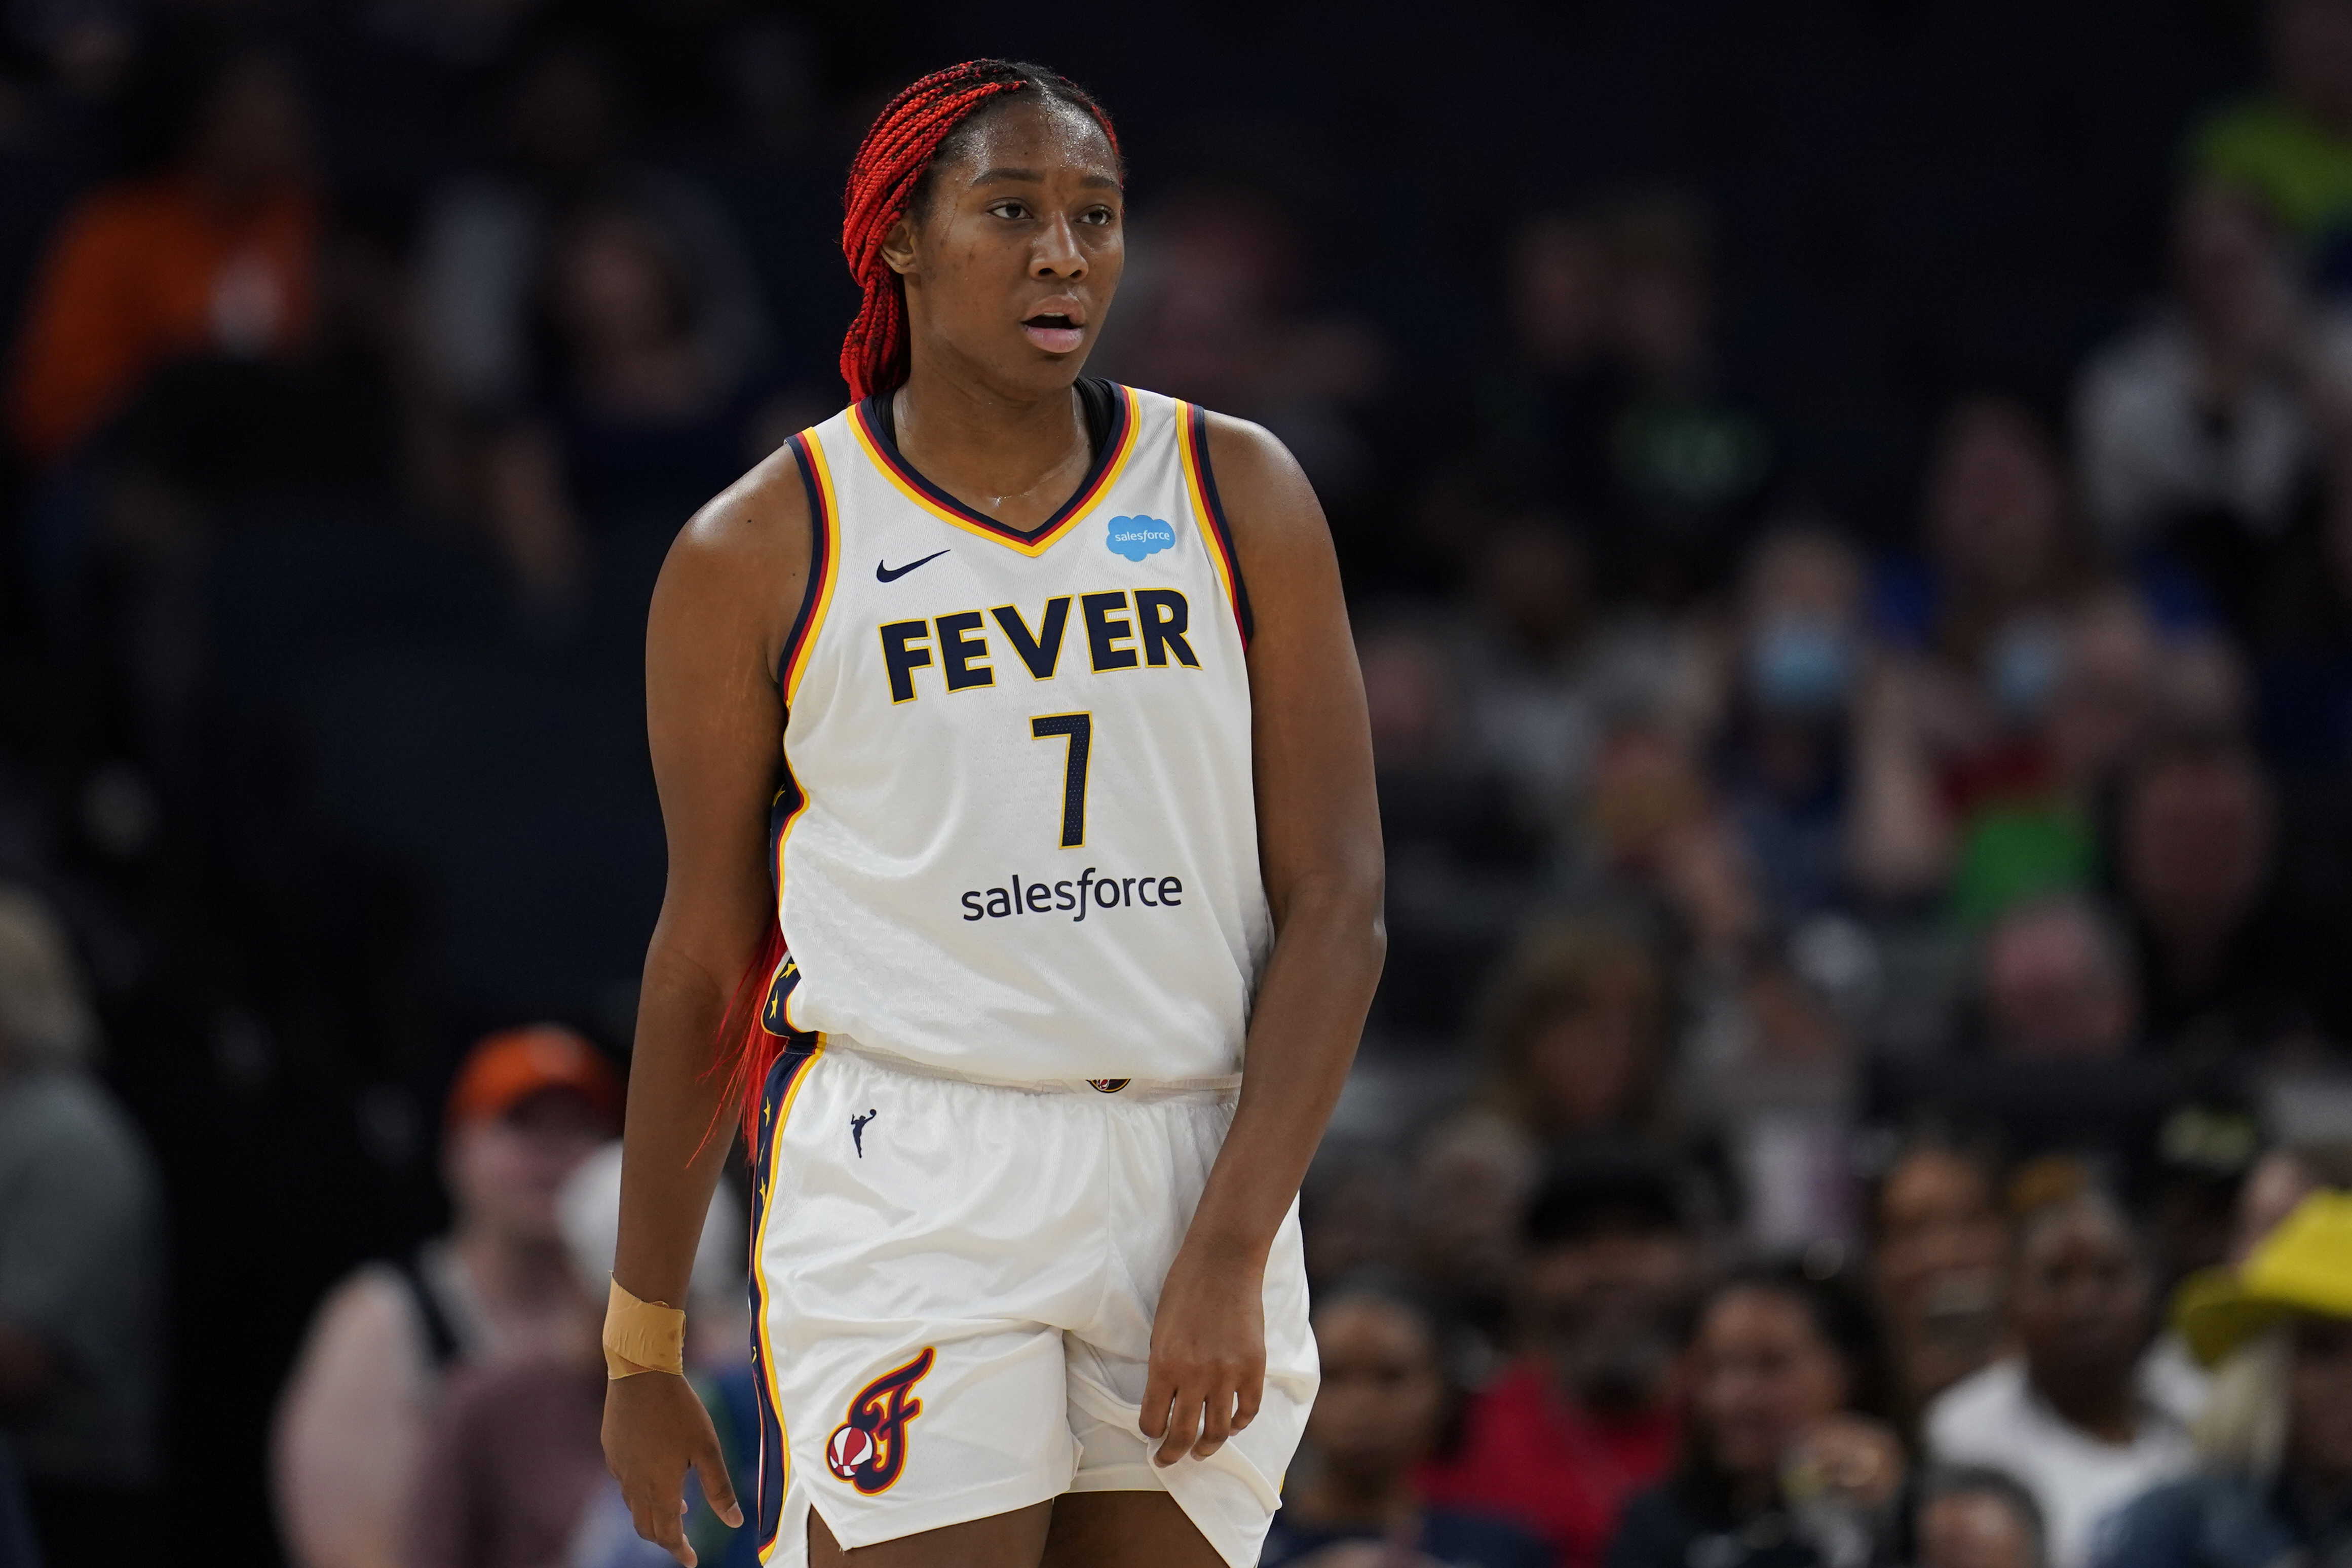 Aliyah Boston was named a WNBA All-Star starter as a rookie! Celebrate her  historic achievement with her All-Star jersey 🔥